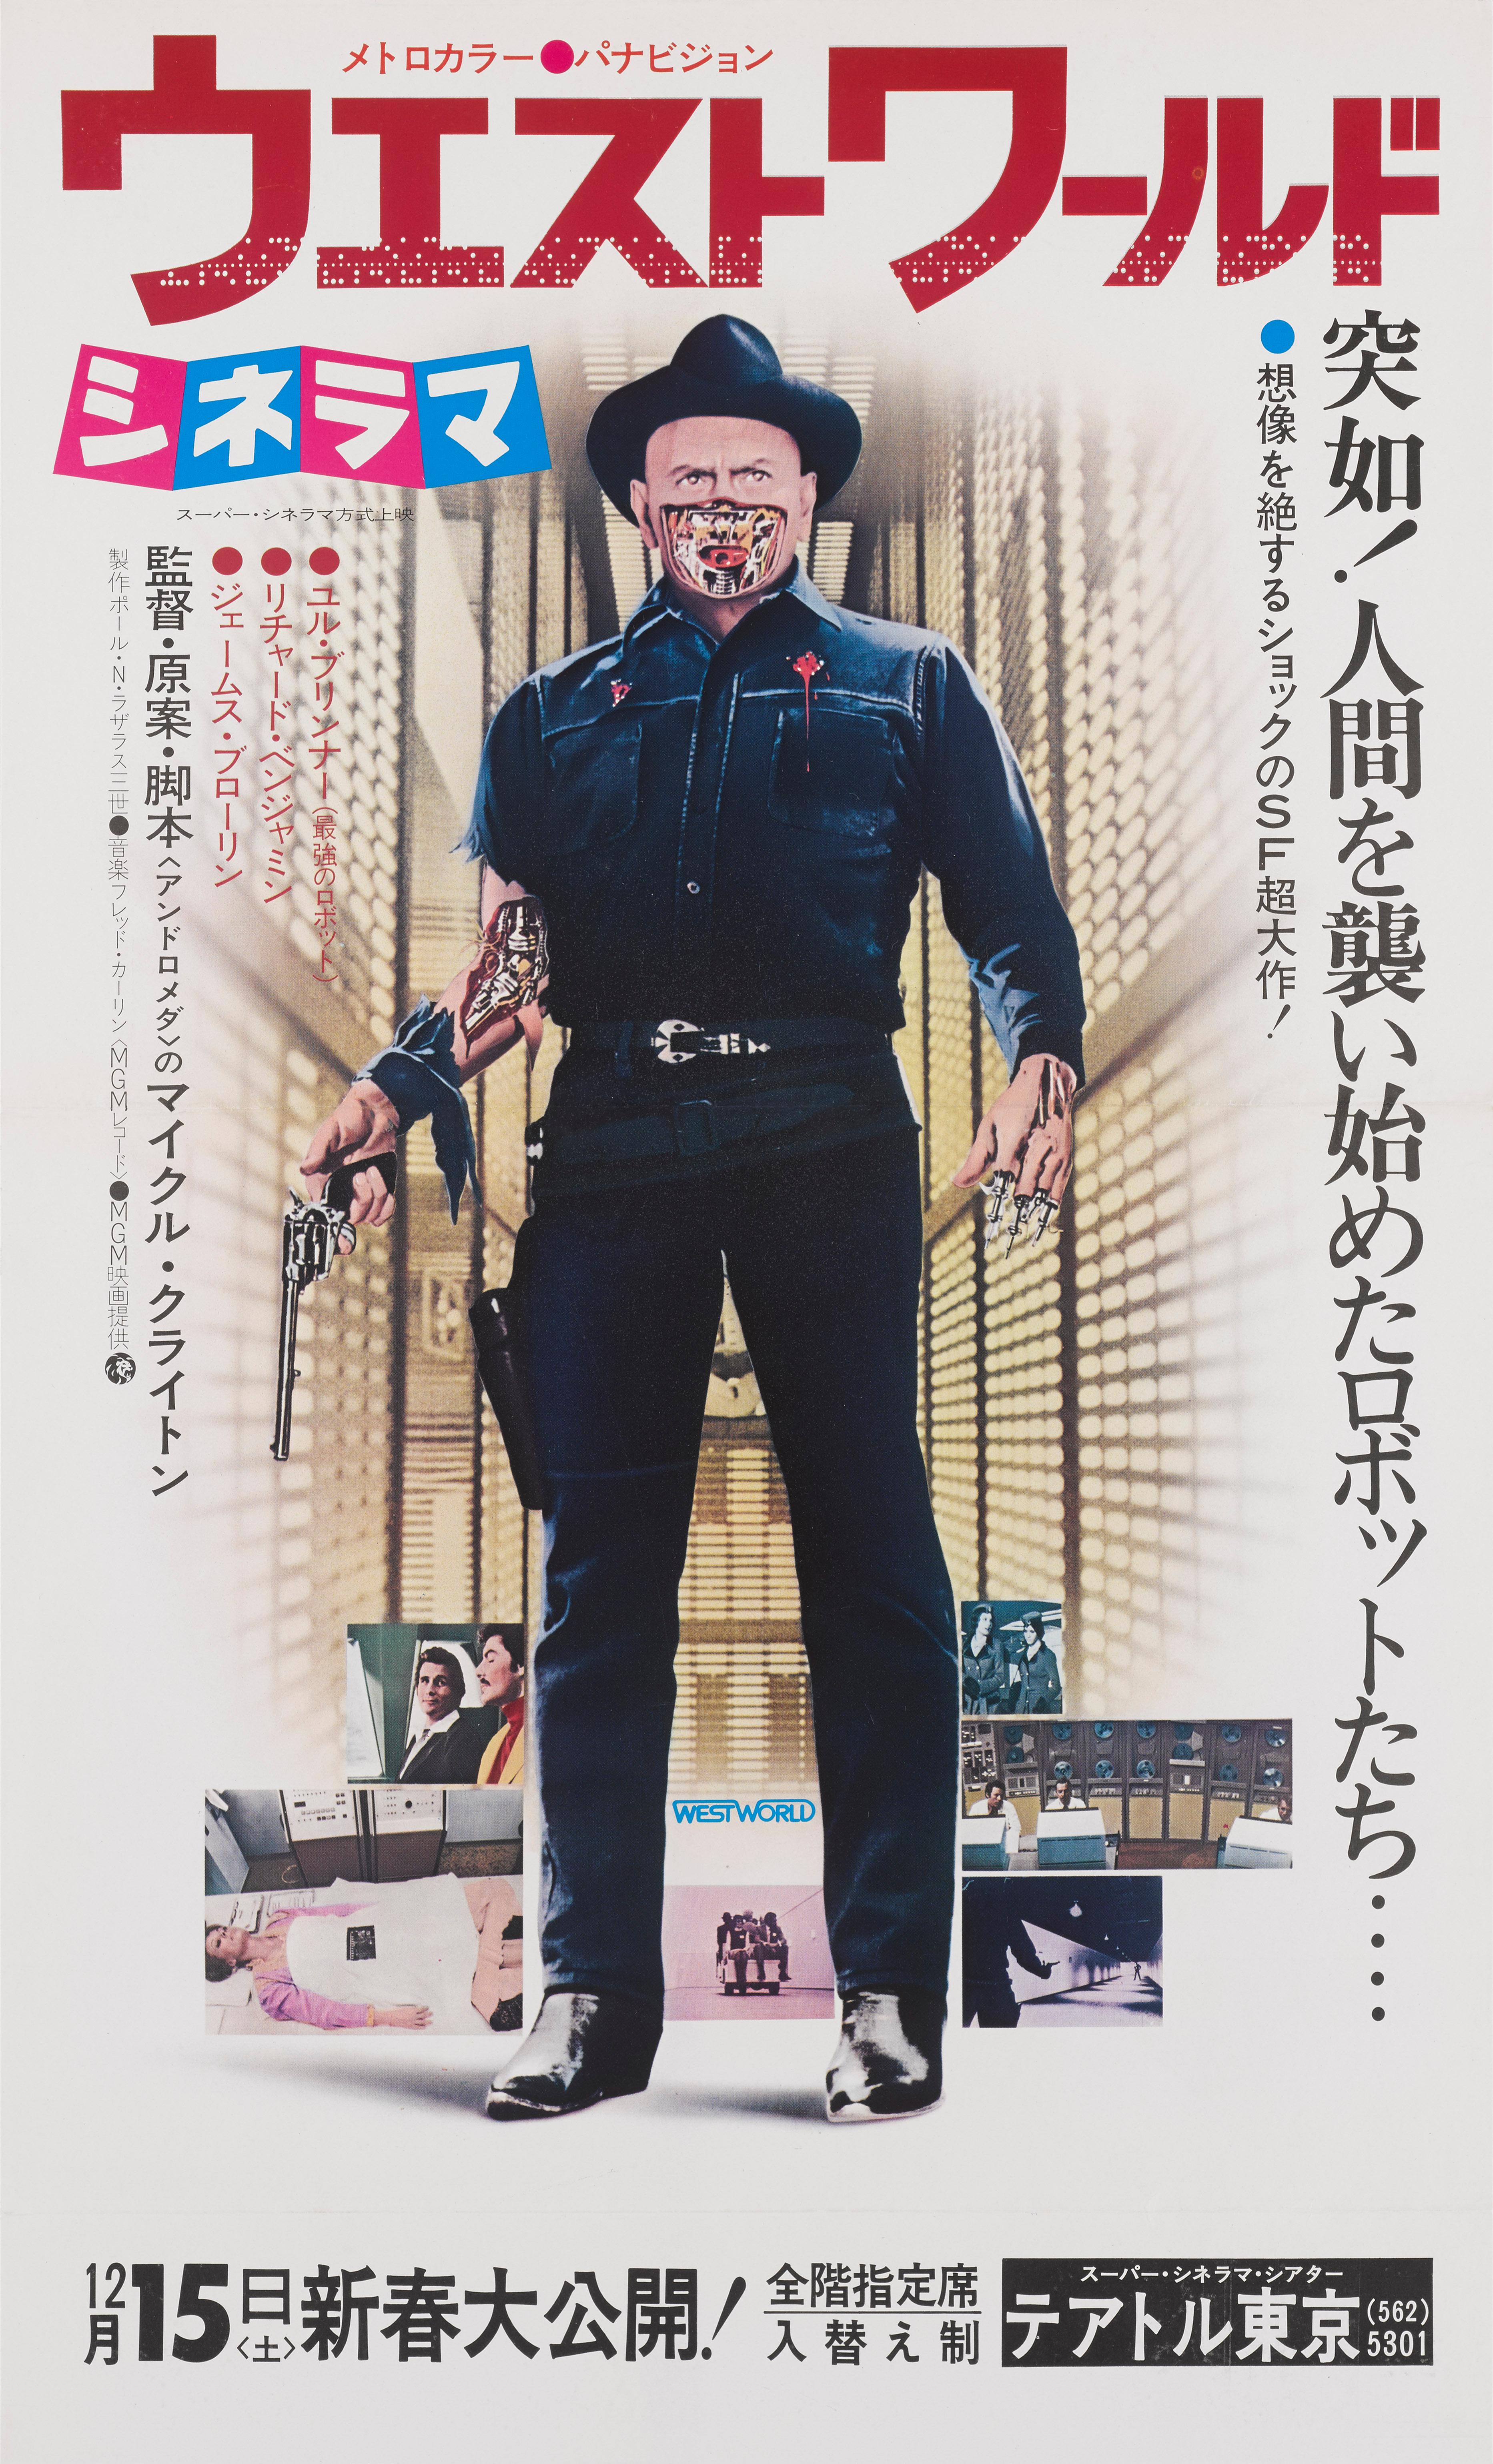 Original Japanese film poster for 1973 Science fiction film Westworld.
This film was directed by Michael Crichton and starred Yul Brynner, Richard Benjamin and James Brolin
This is a rare poster as it was created for the films Tokyo premier